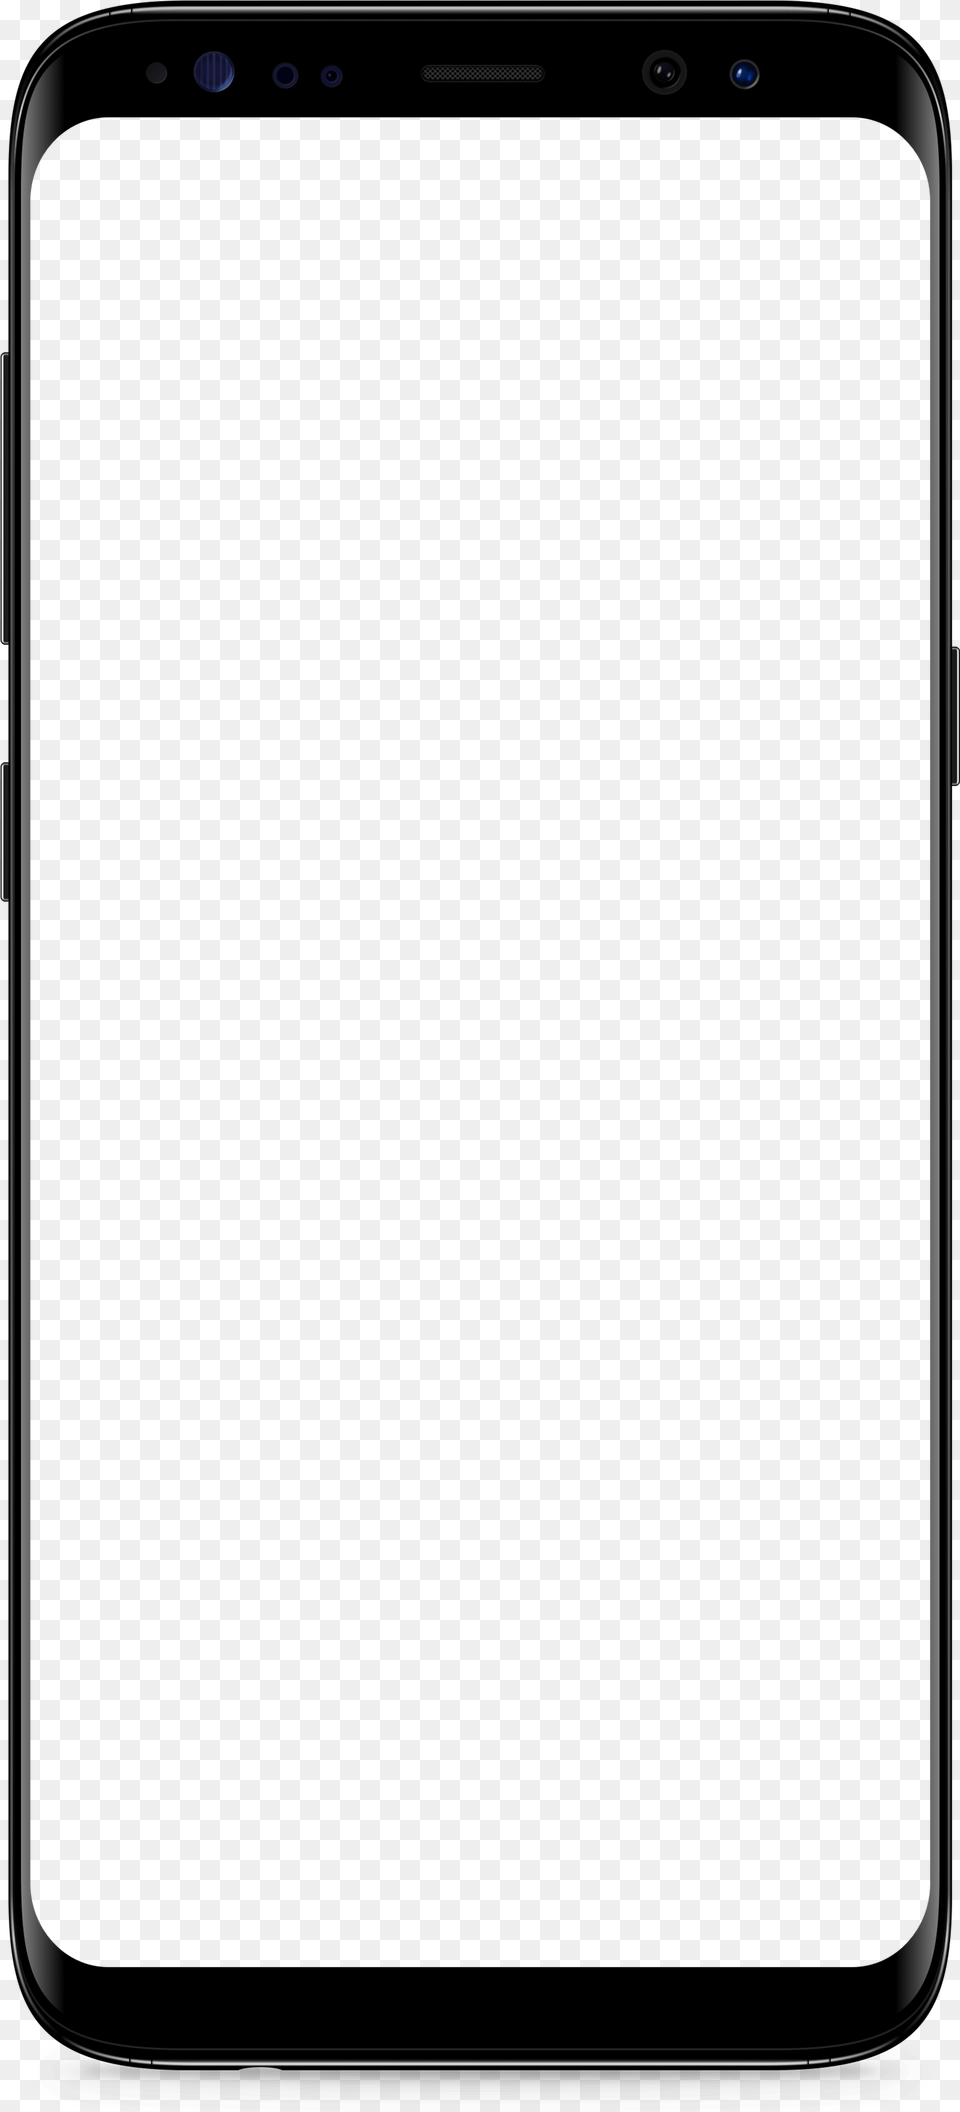 Samsung Galaxy S8 Black Background Portable Communications Device, Electronics, Mobile Phone, Phone Free Transparent Png